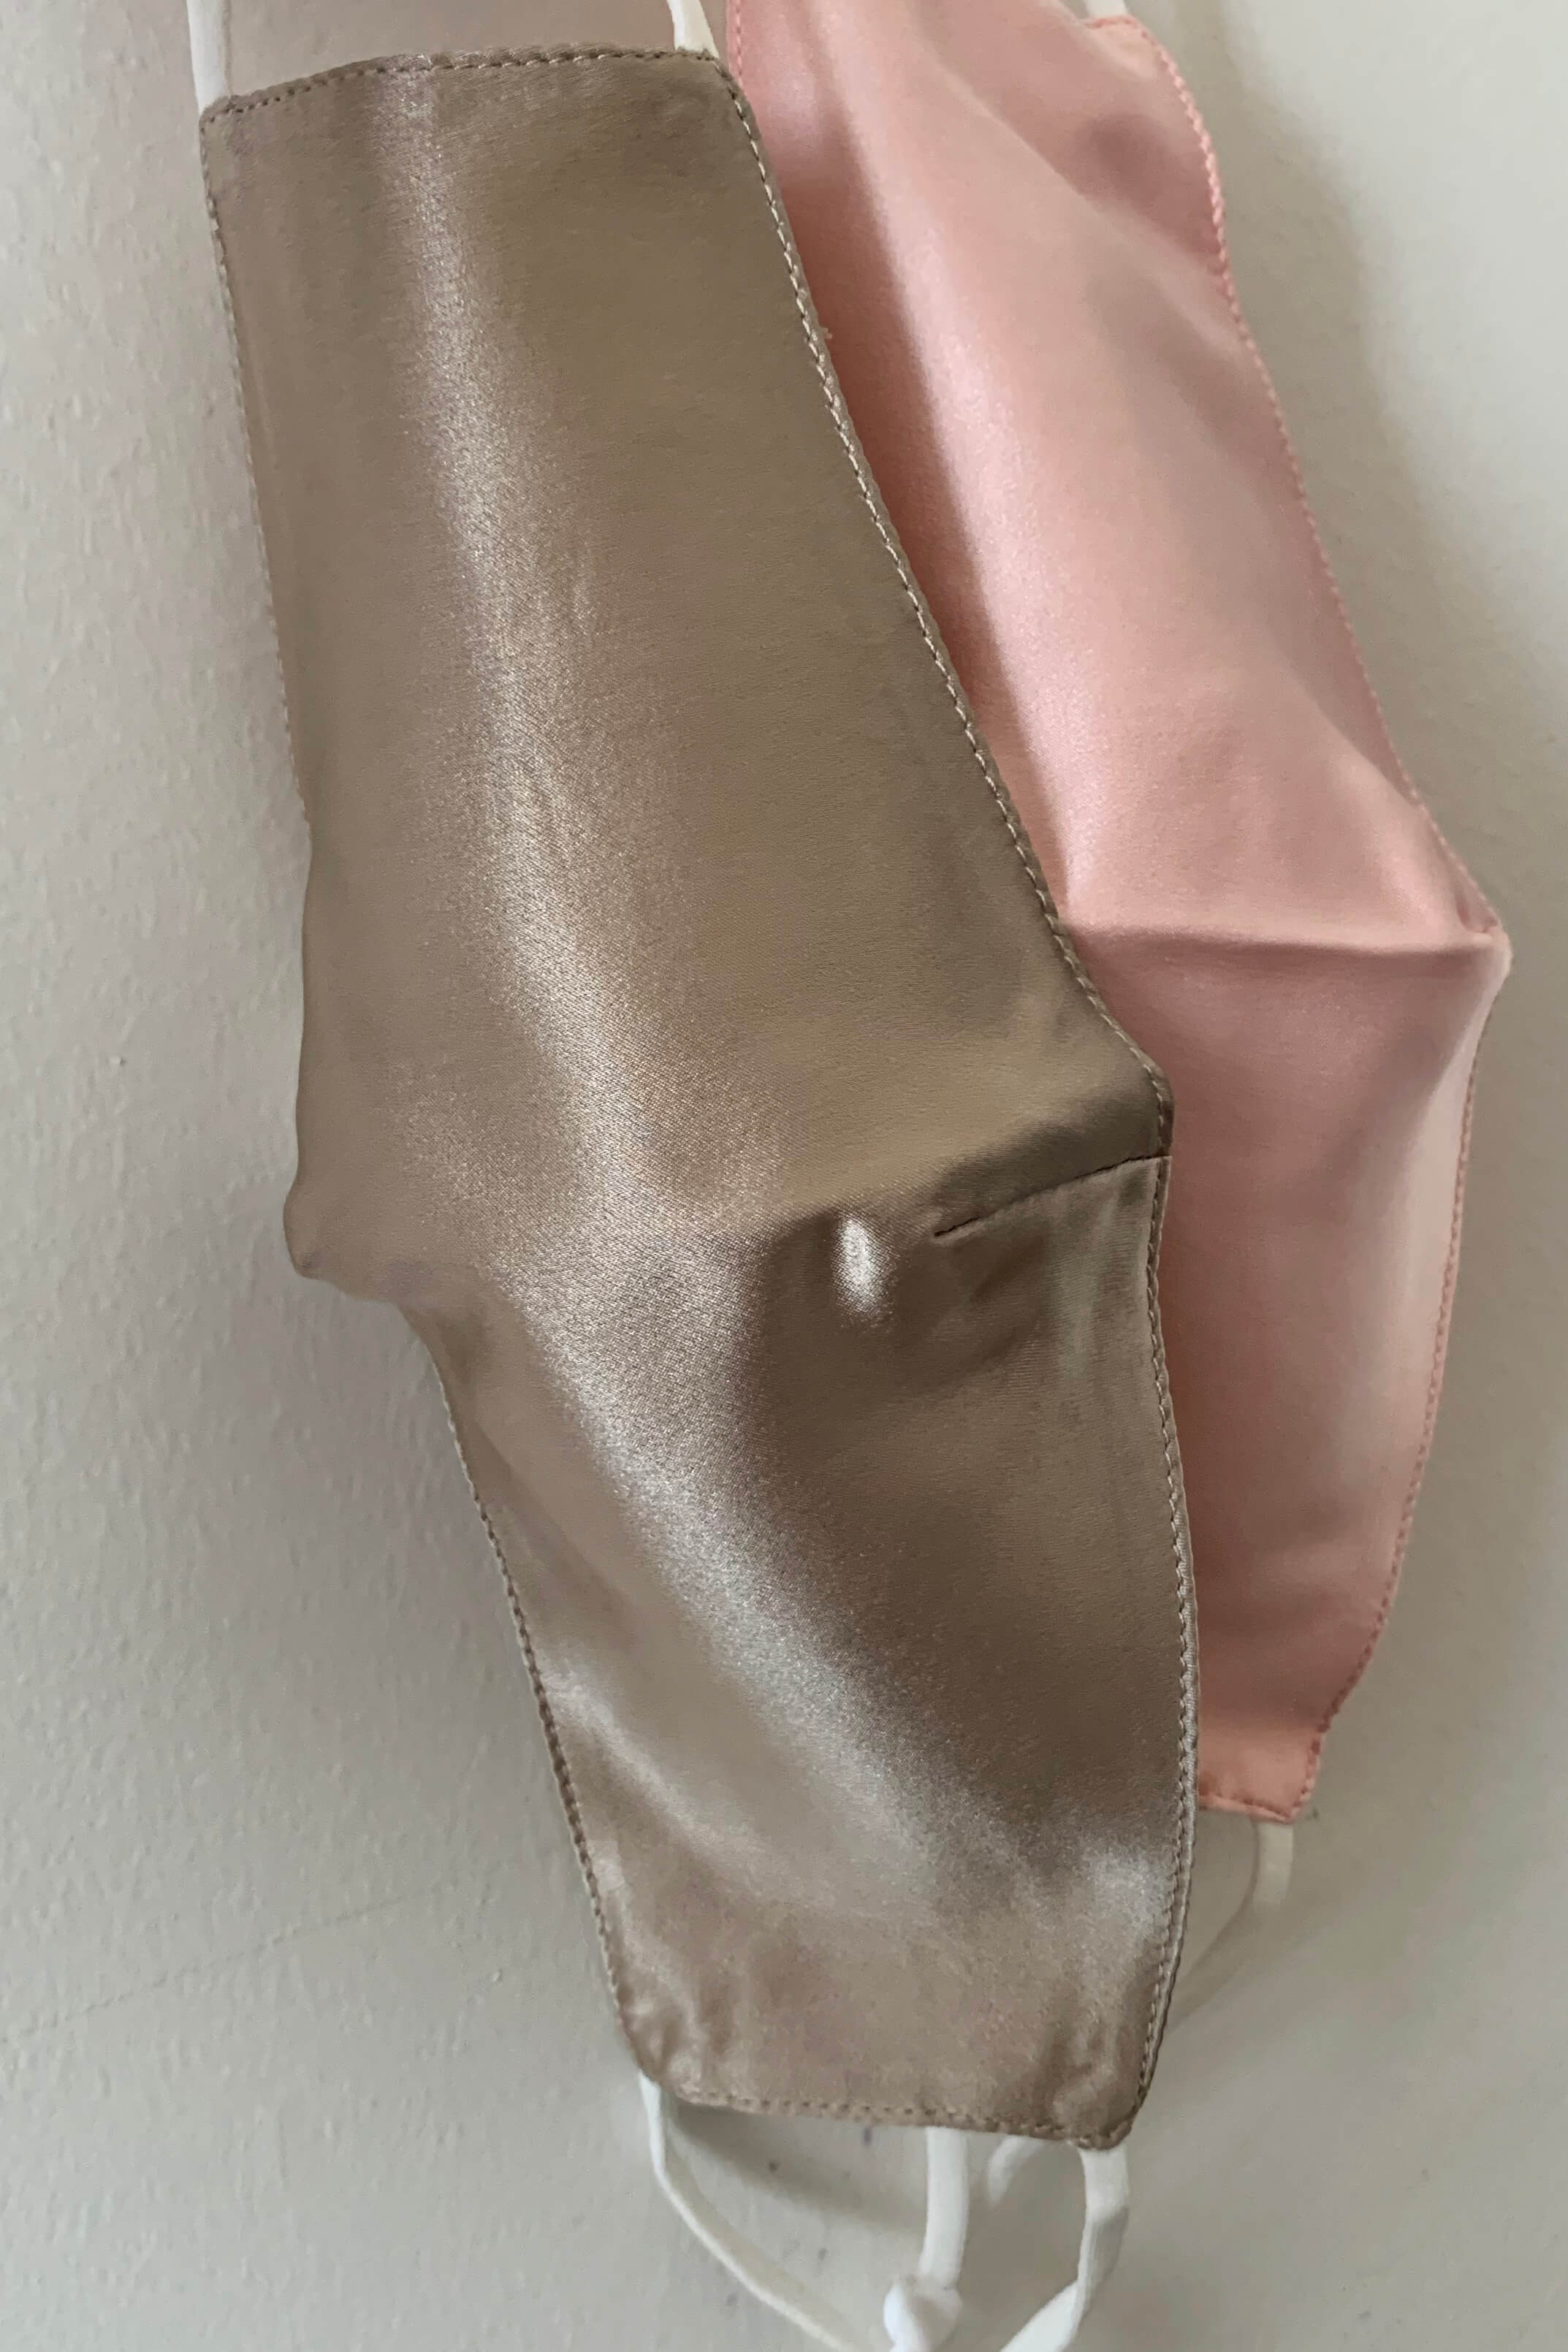 ULTRA Silk Face Covering - Champagne Gold - BASK™